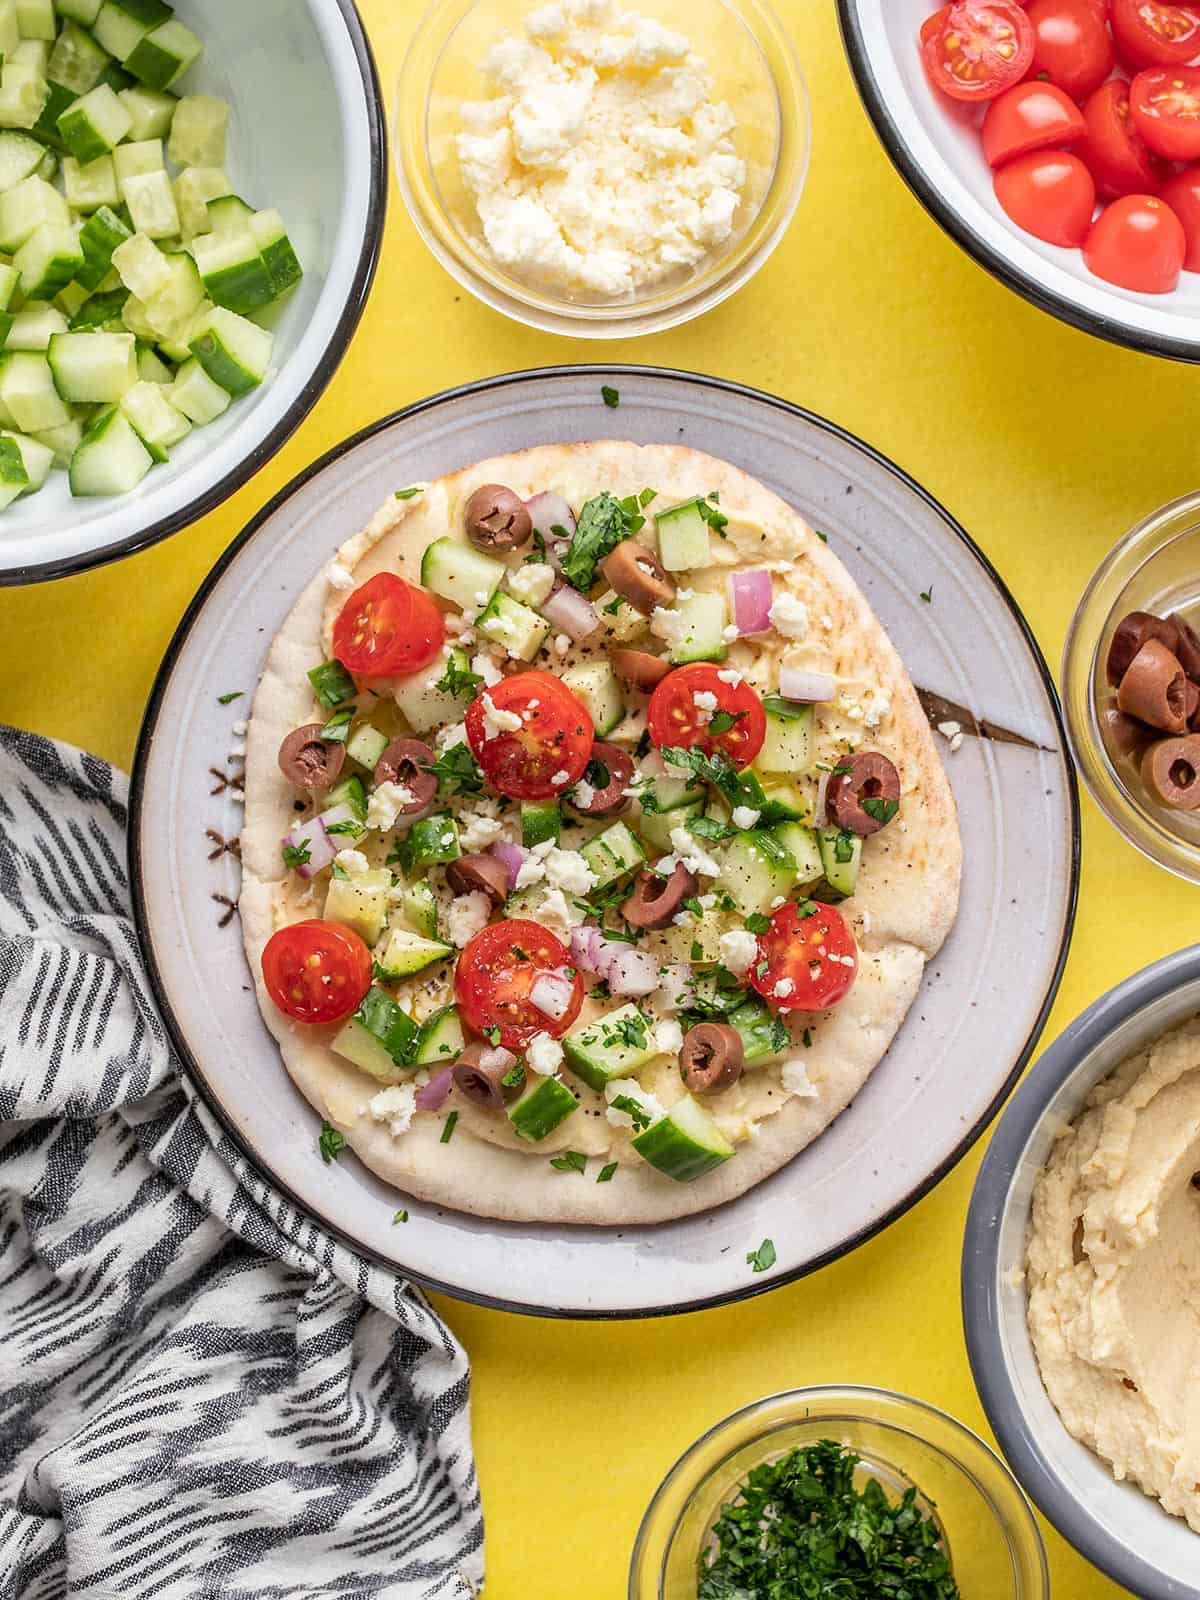 Loaded hummus pita on a plate surrounded by ingredients.